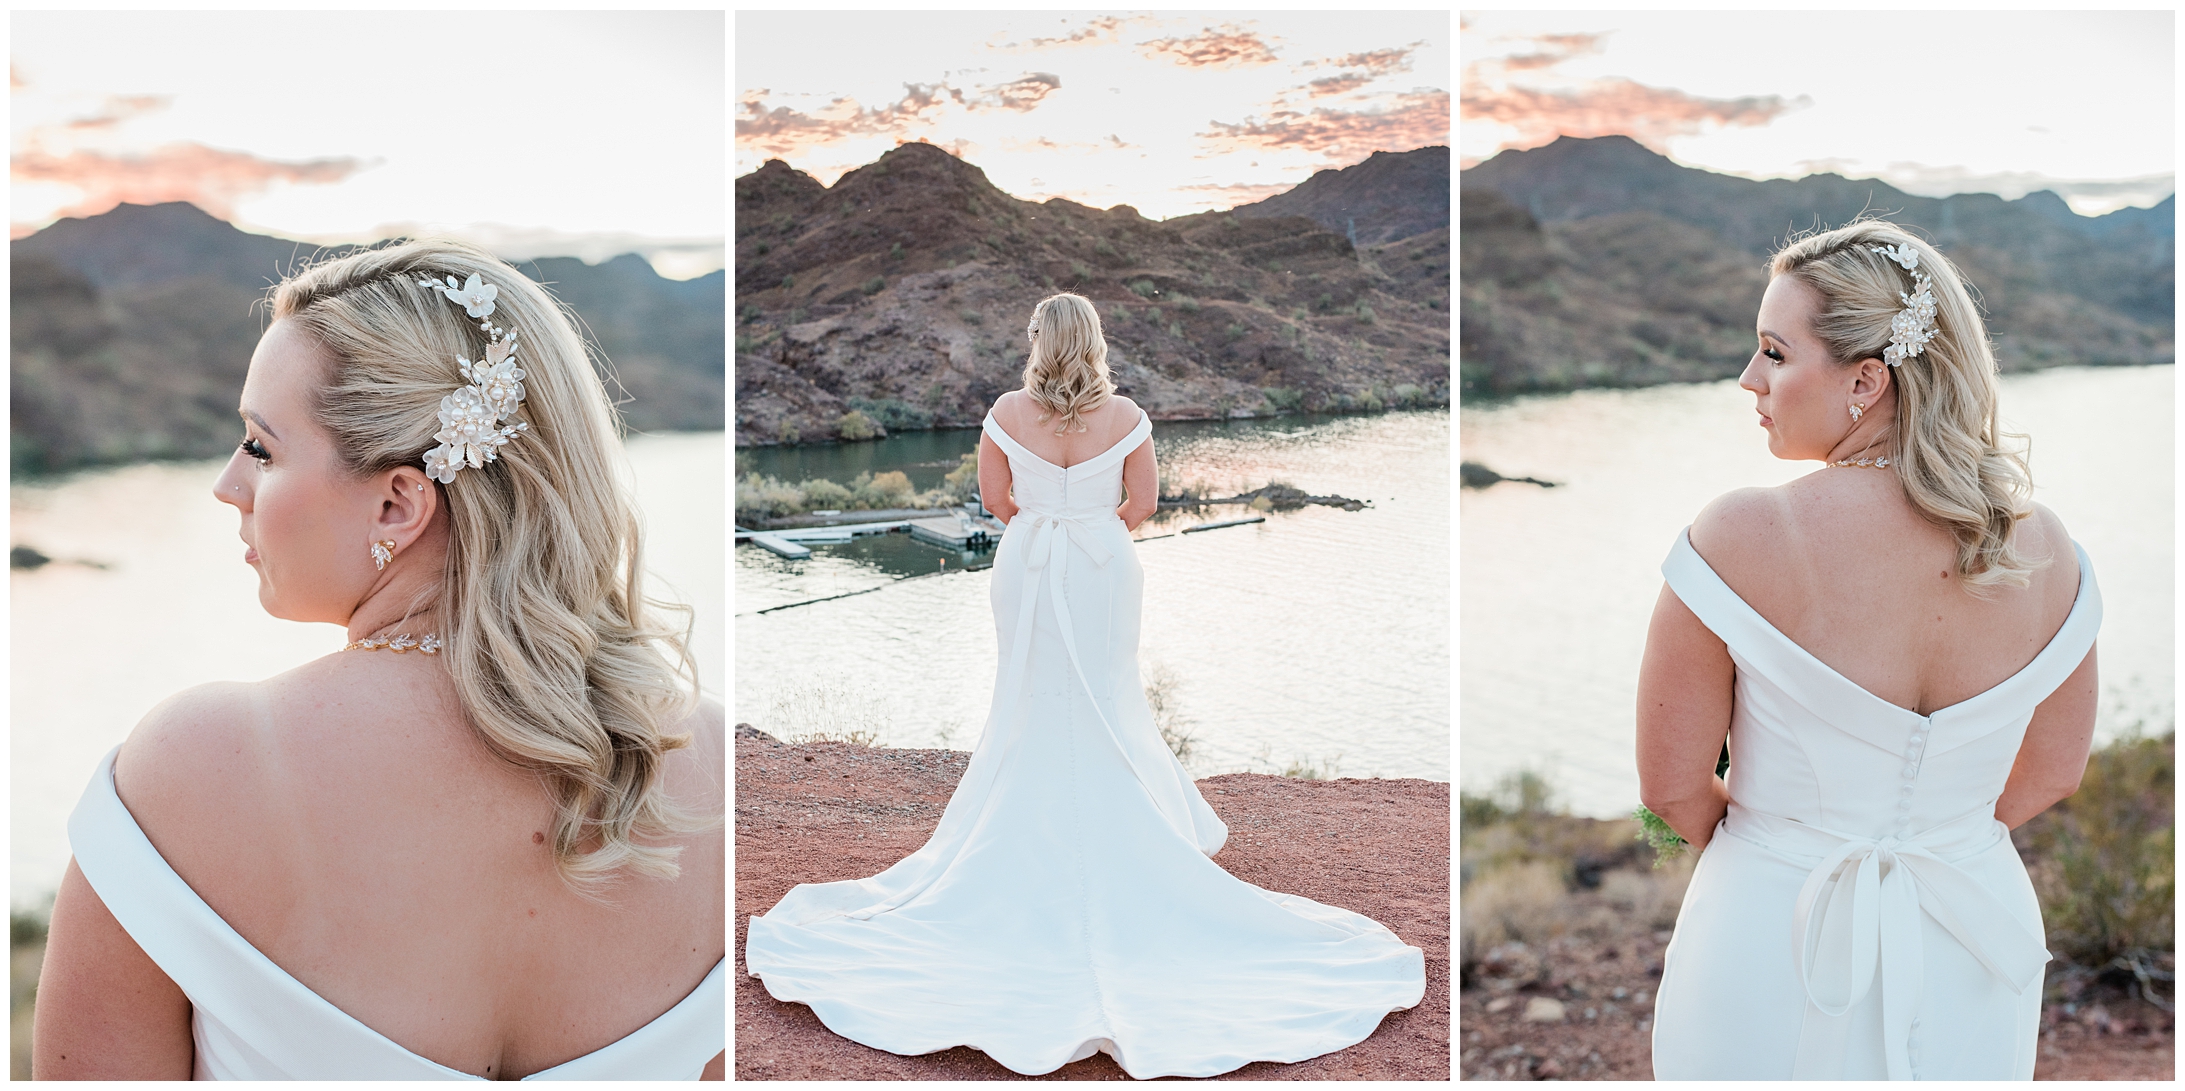 woman in white wedding dress with a lake in front of her during sunset